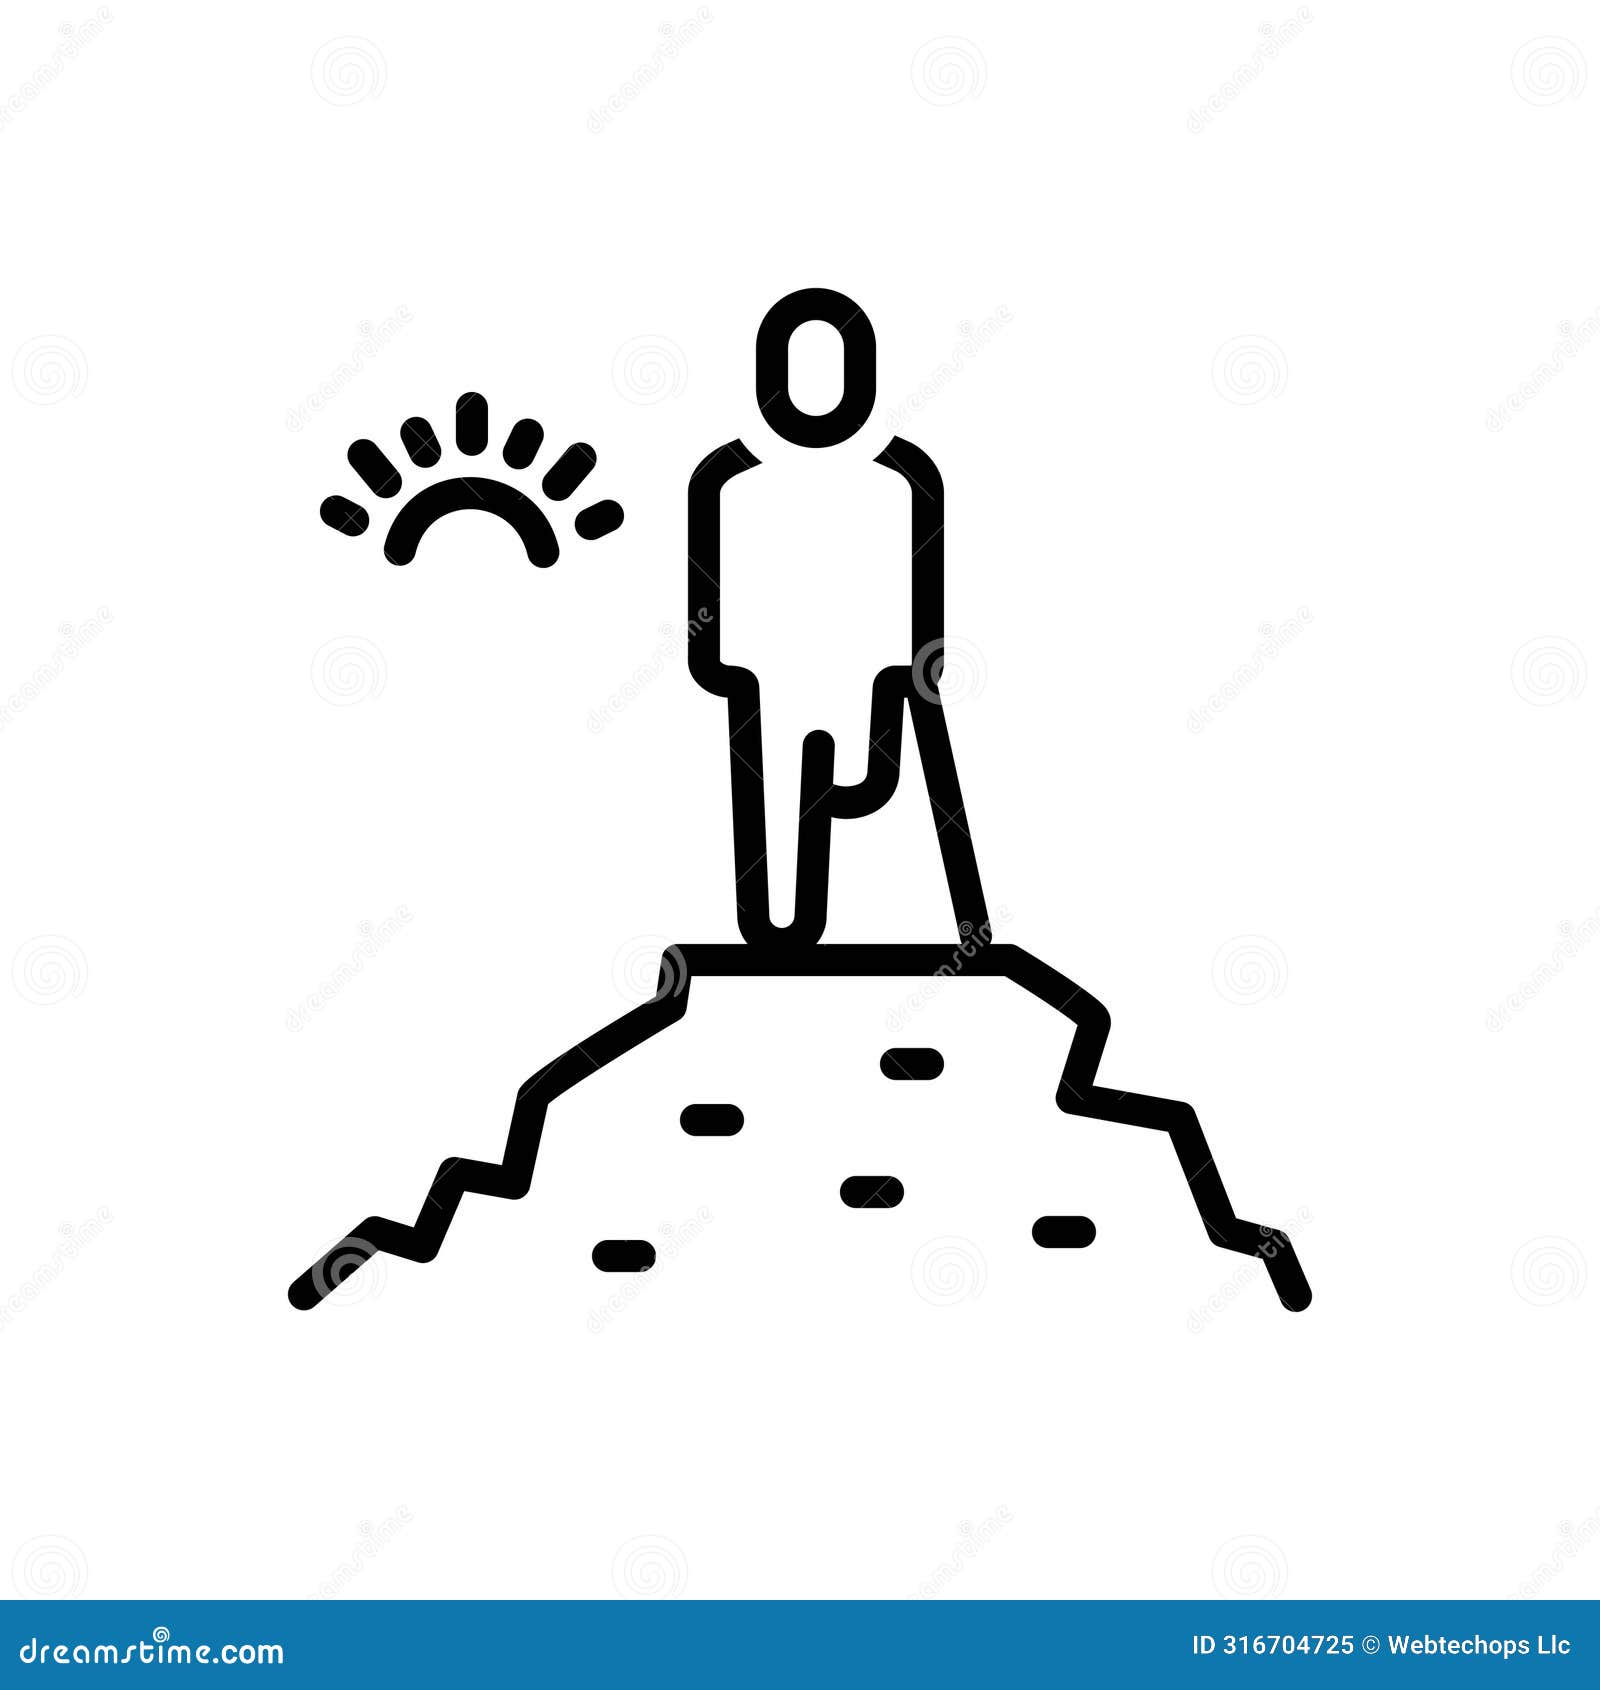 black line icon for possible, limping and climb